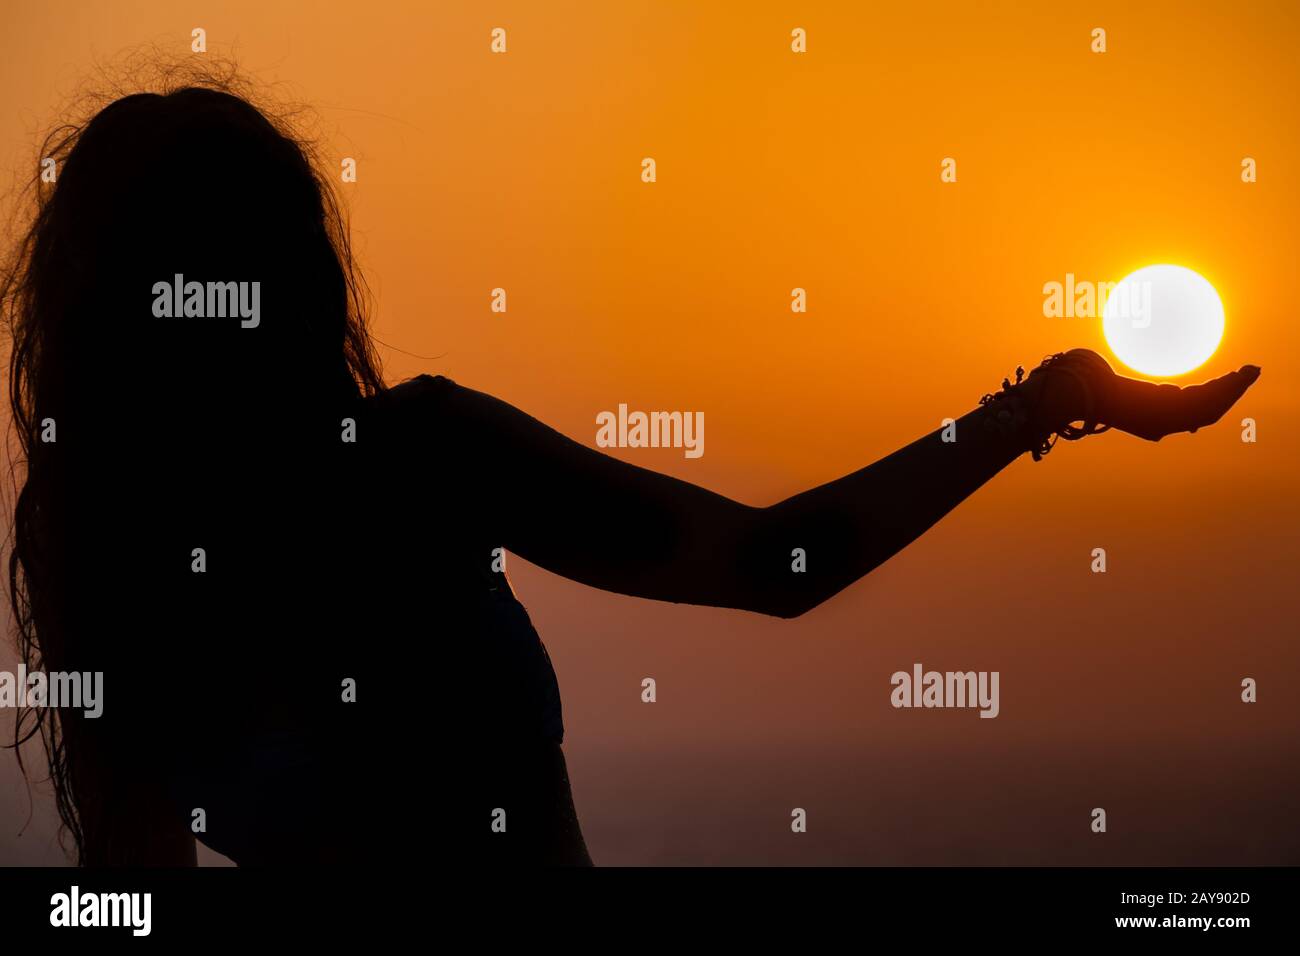 Girl silhouette, her palm appearing to be supporting the sun as it sets Stock Photo